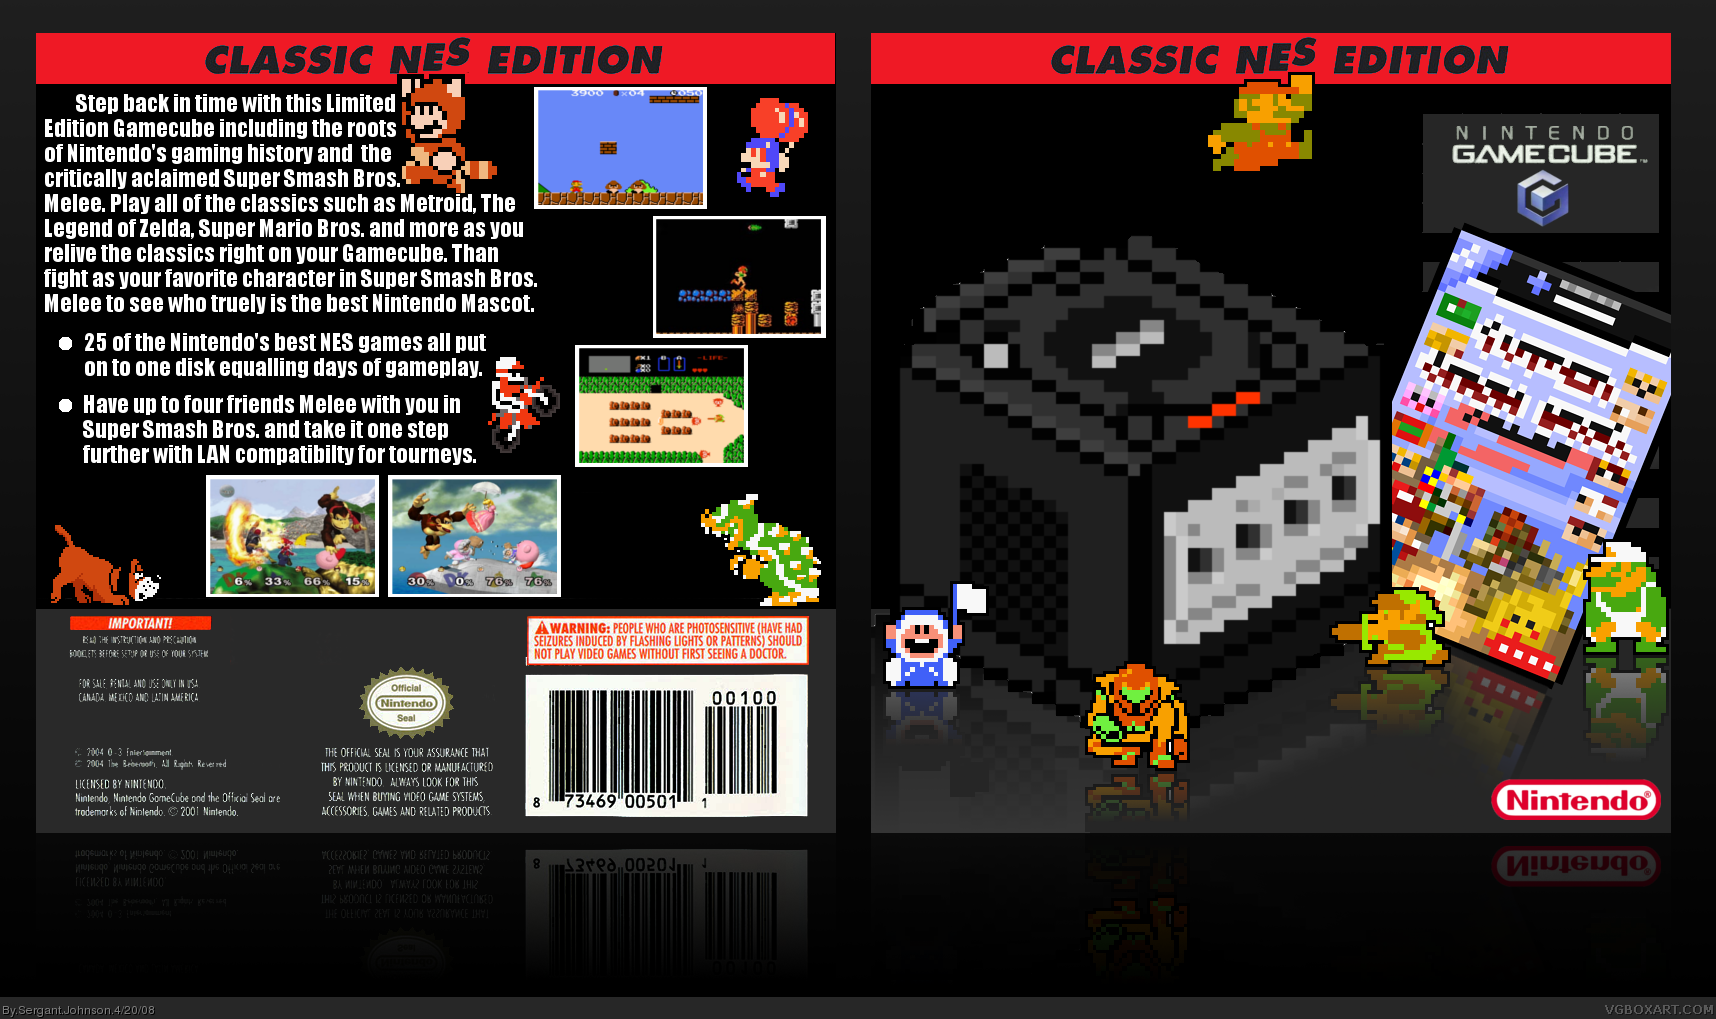 Classic Nes Edition (Console Package) box cover